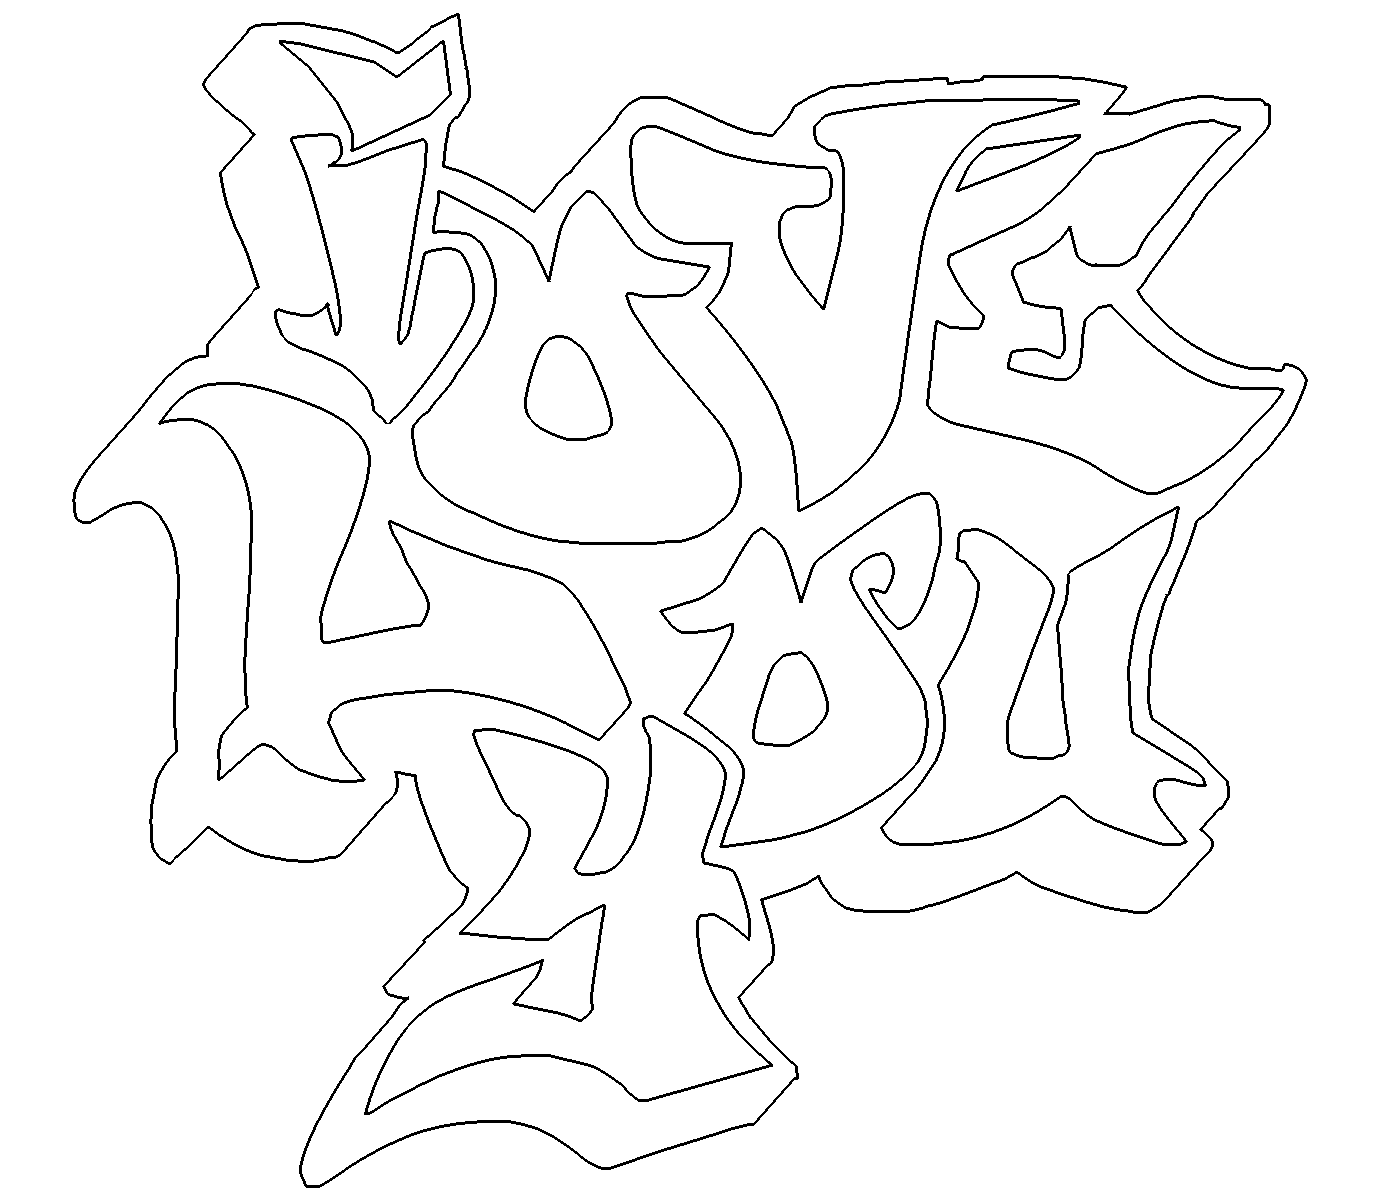 get inspired for love graffiti coloring pages